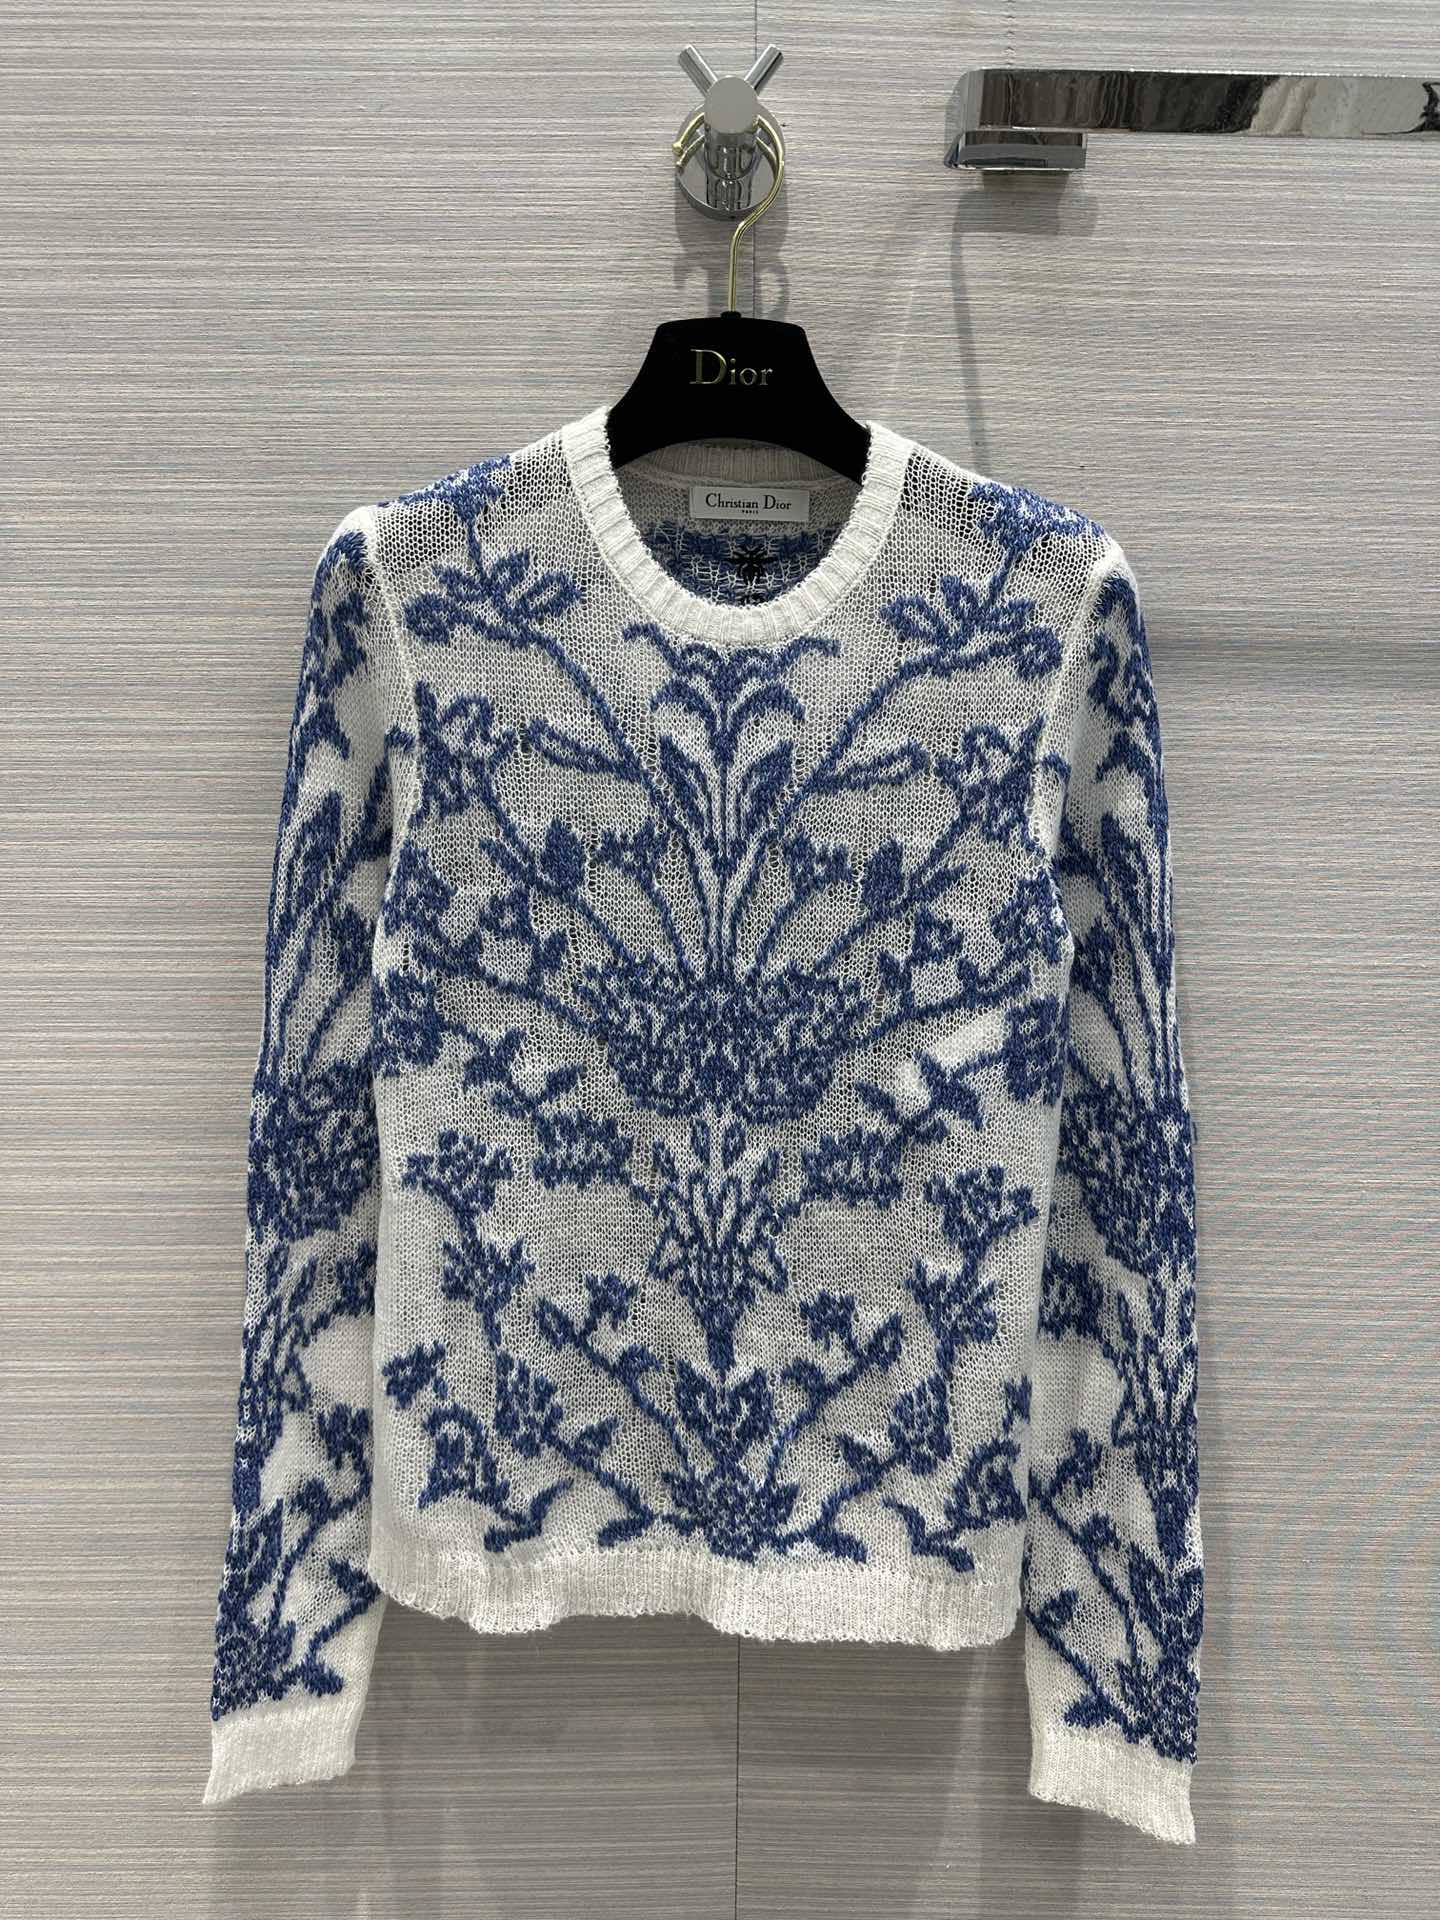 Dior Clothing Knit Sweater White Embroidery Cashmere Knitting Weave Fall Collection